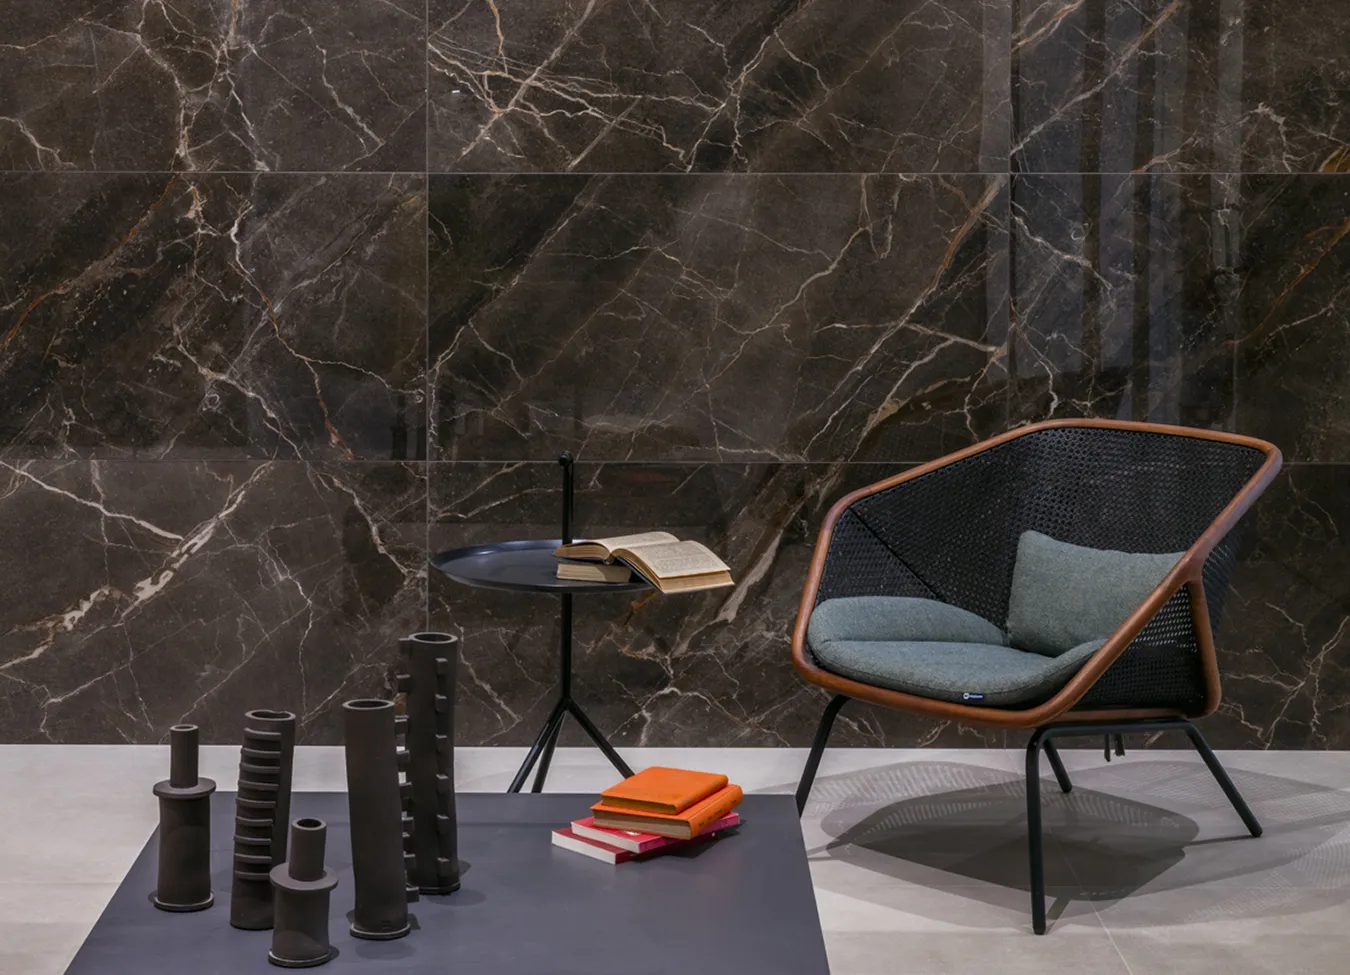 "Chic wall featuring Ombra Moca marble-effect porcelain stoneware from the 9cento collection, with designer chair and modern accessories.